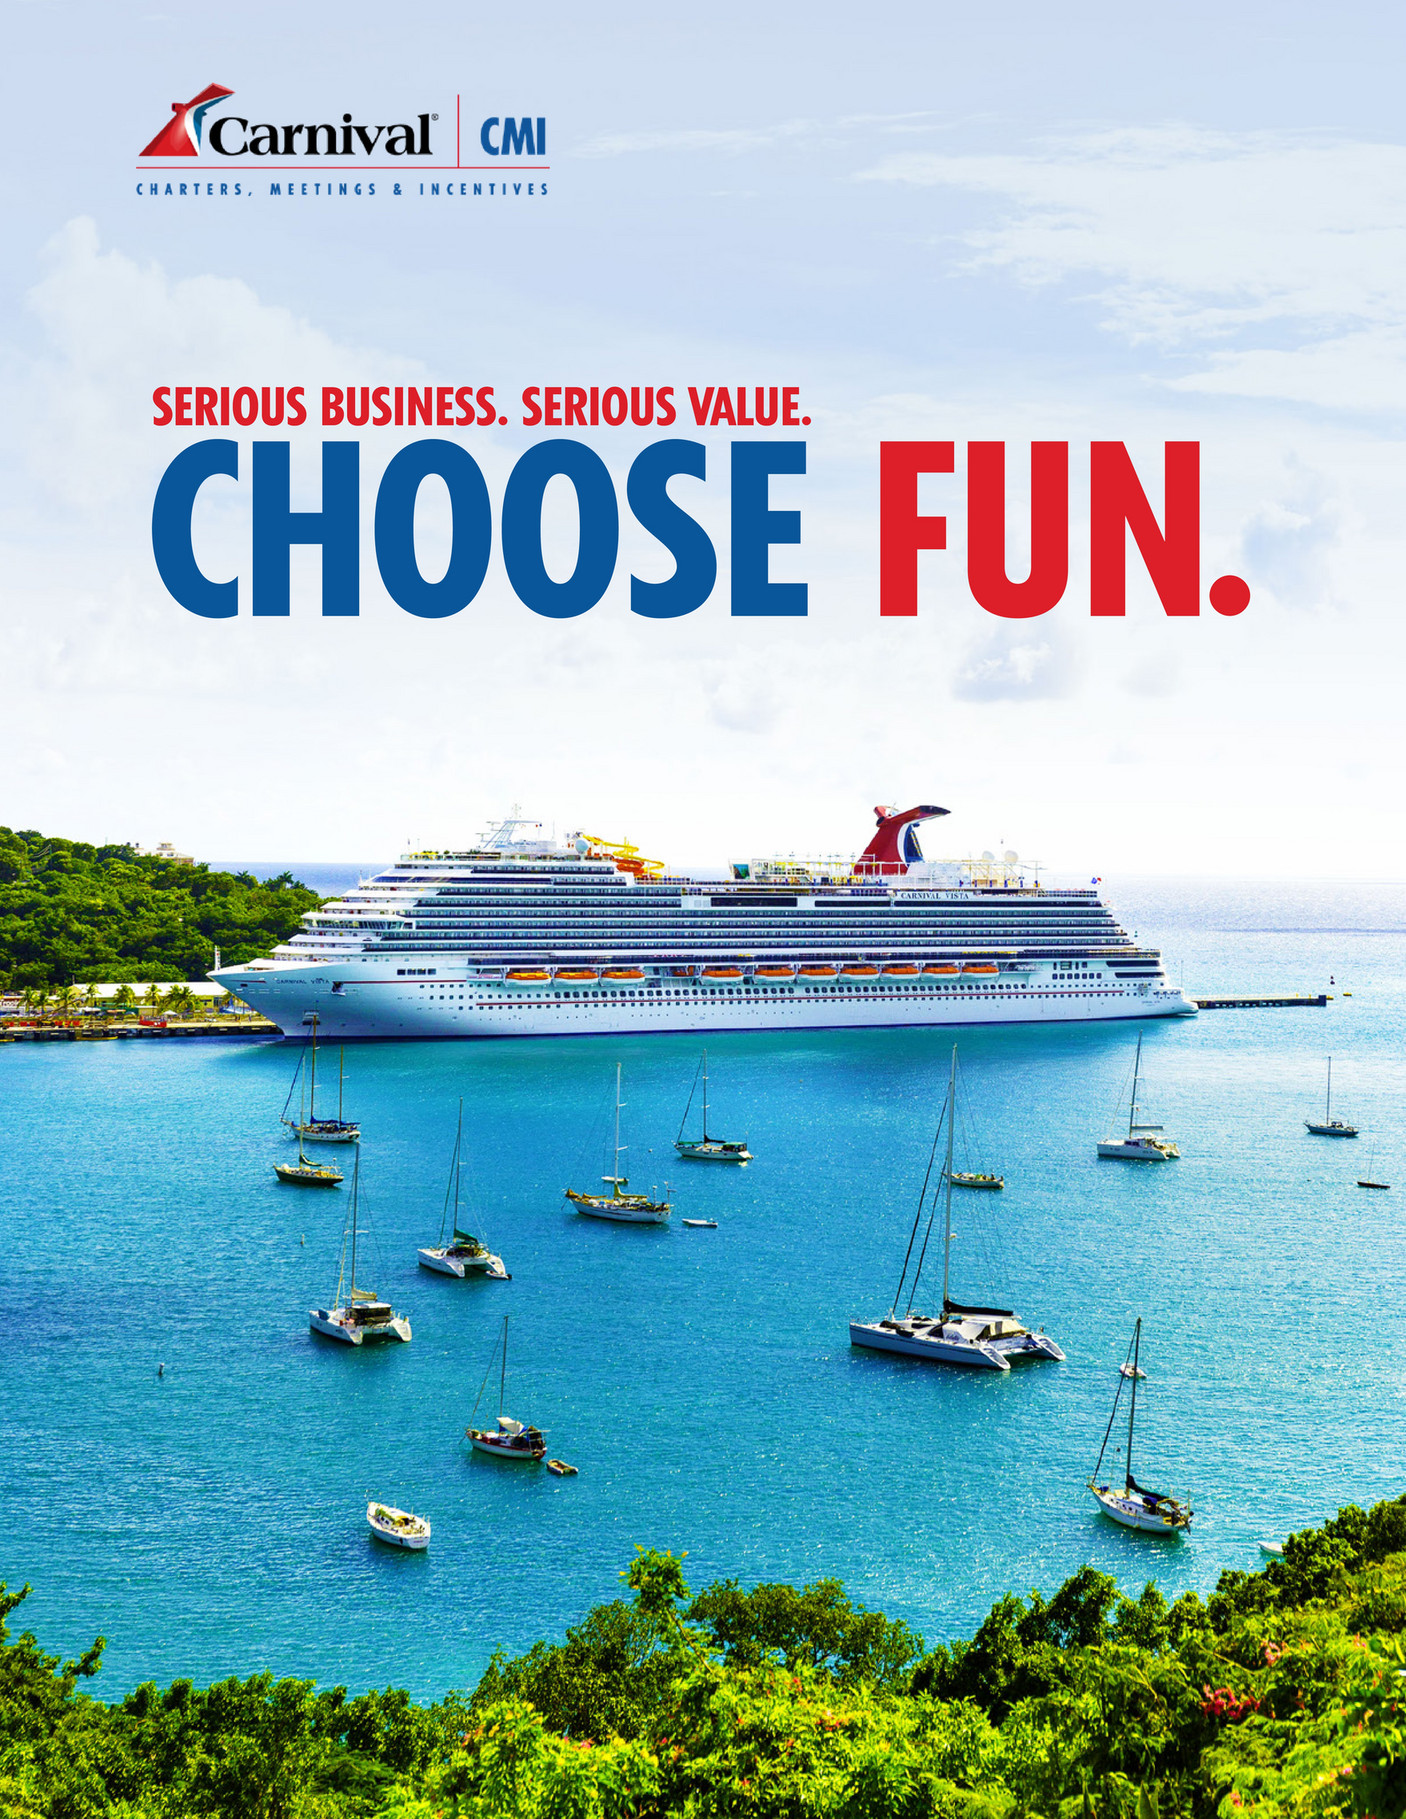 book carnival cruise from uk